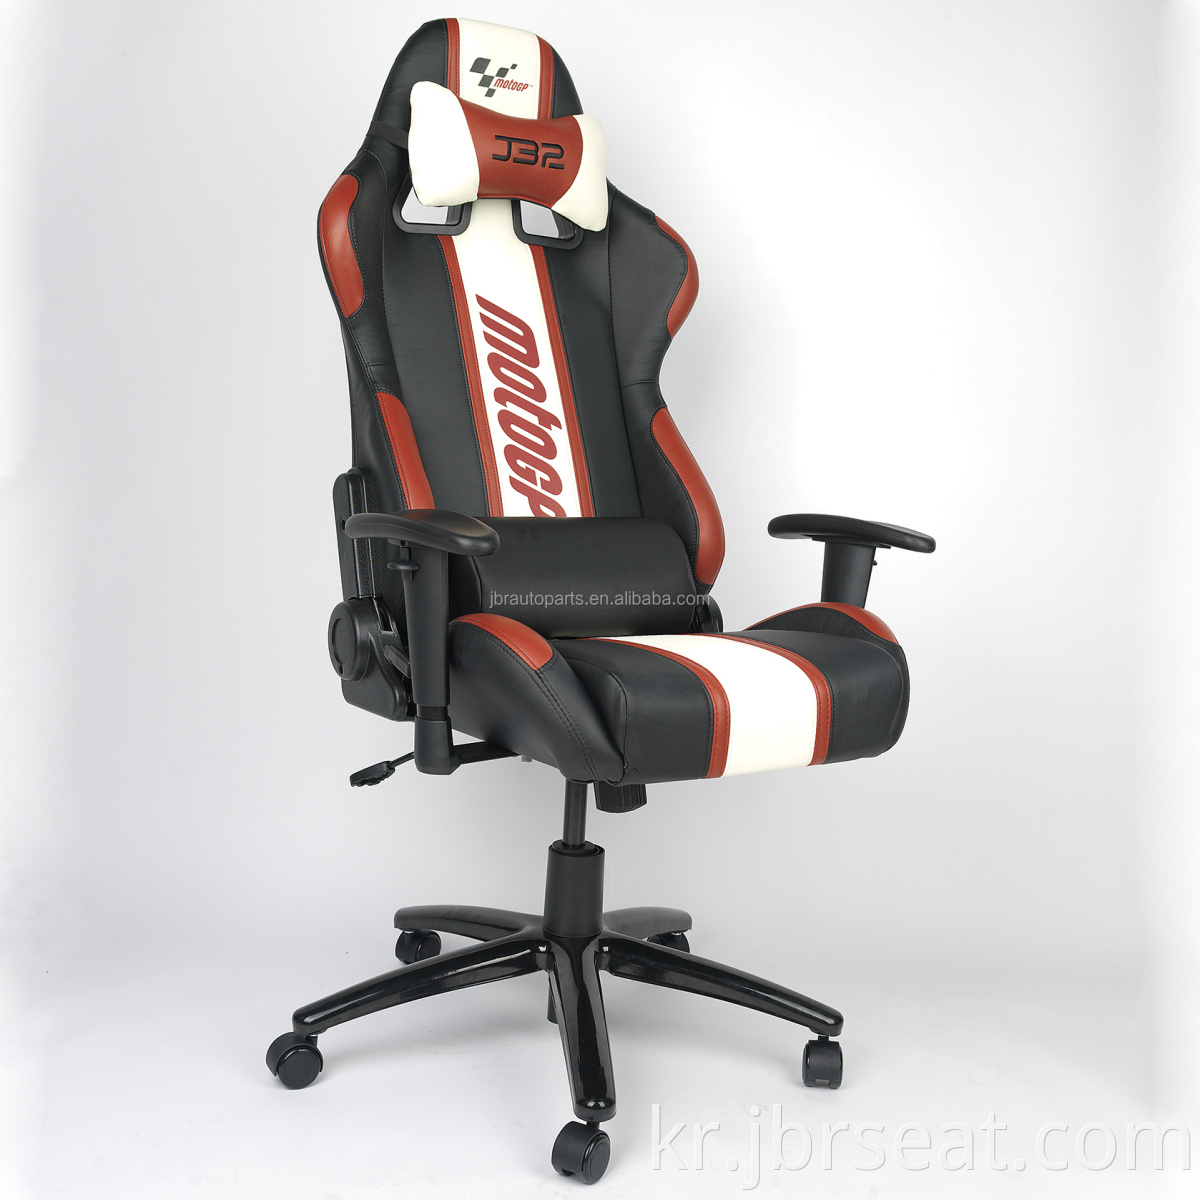 adjustable racing seat office chair